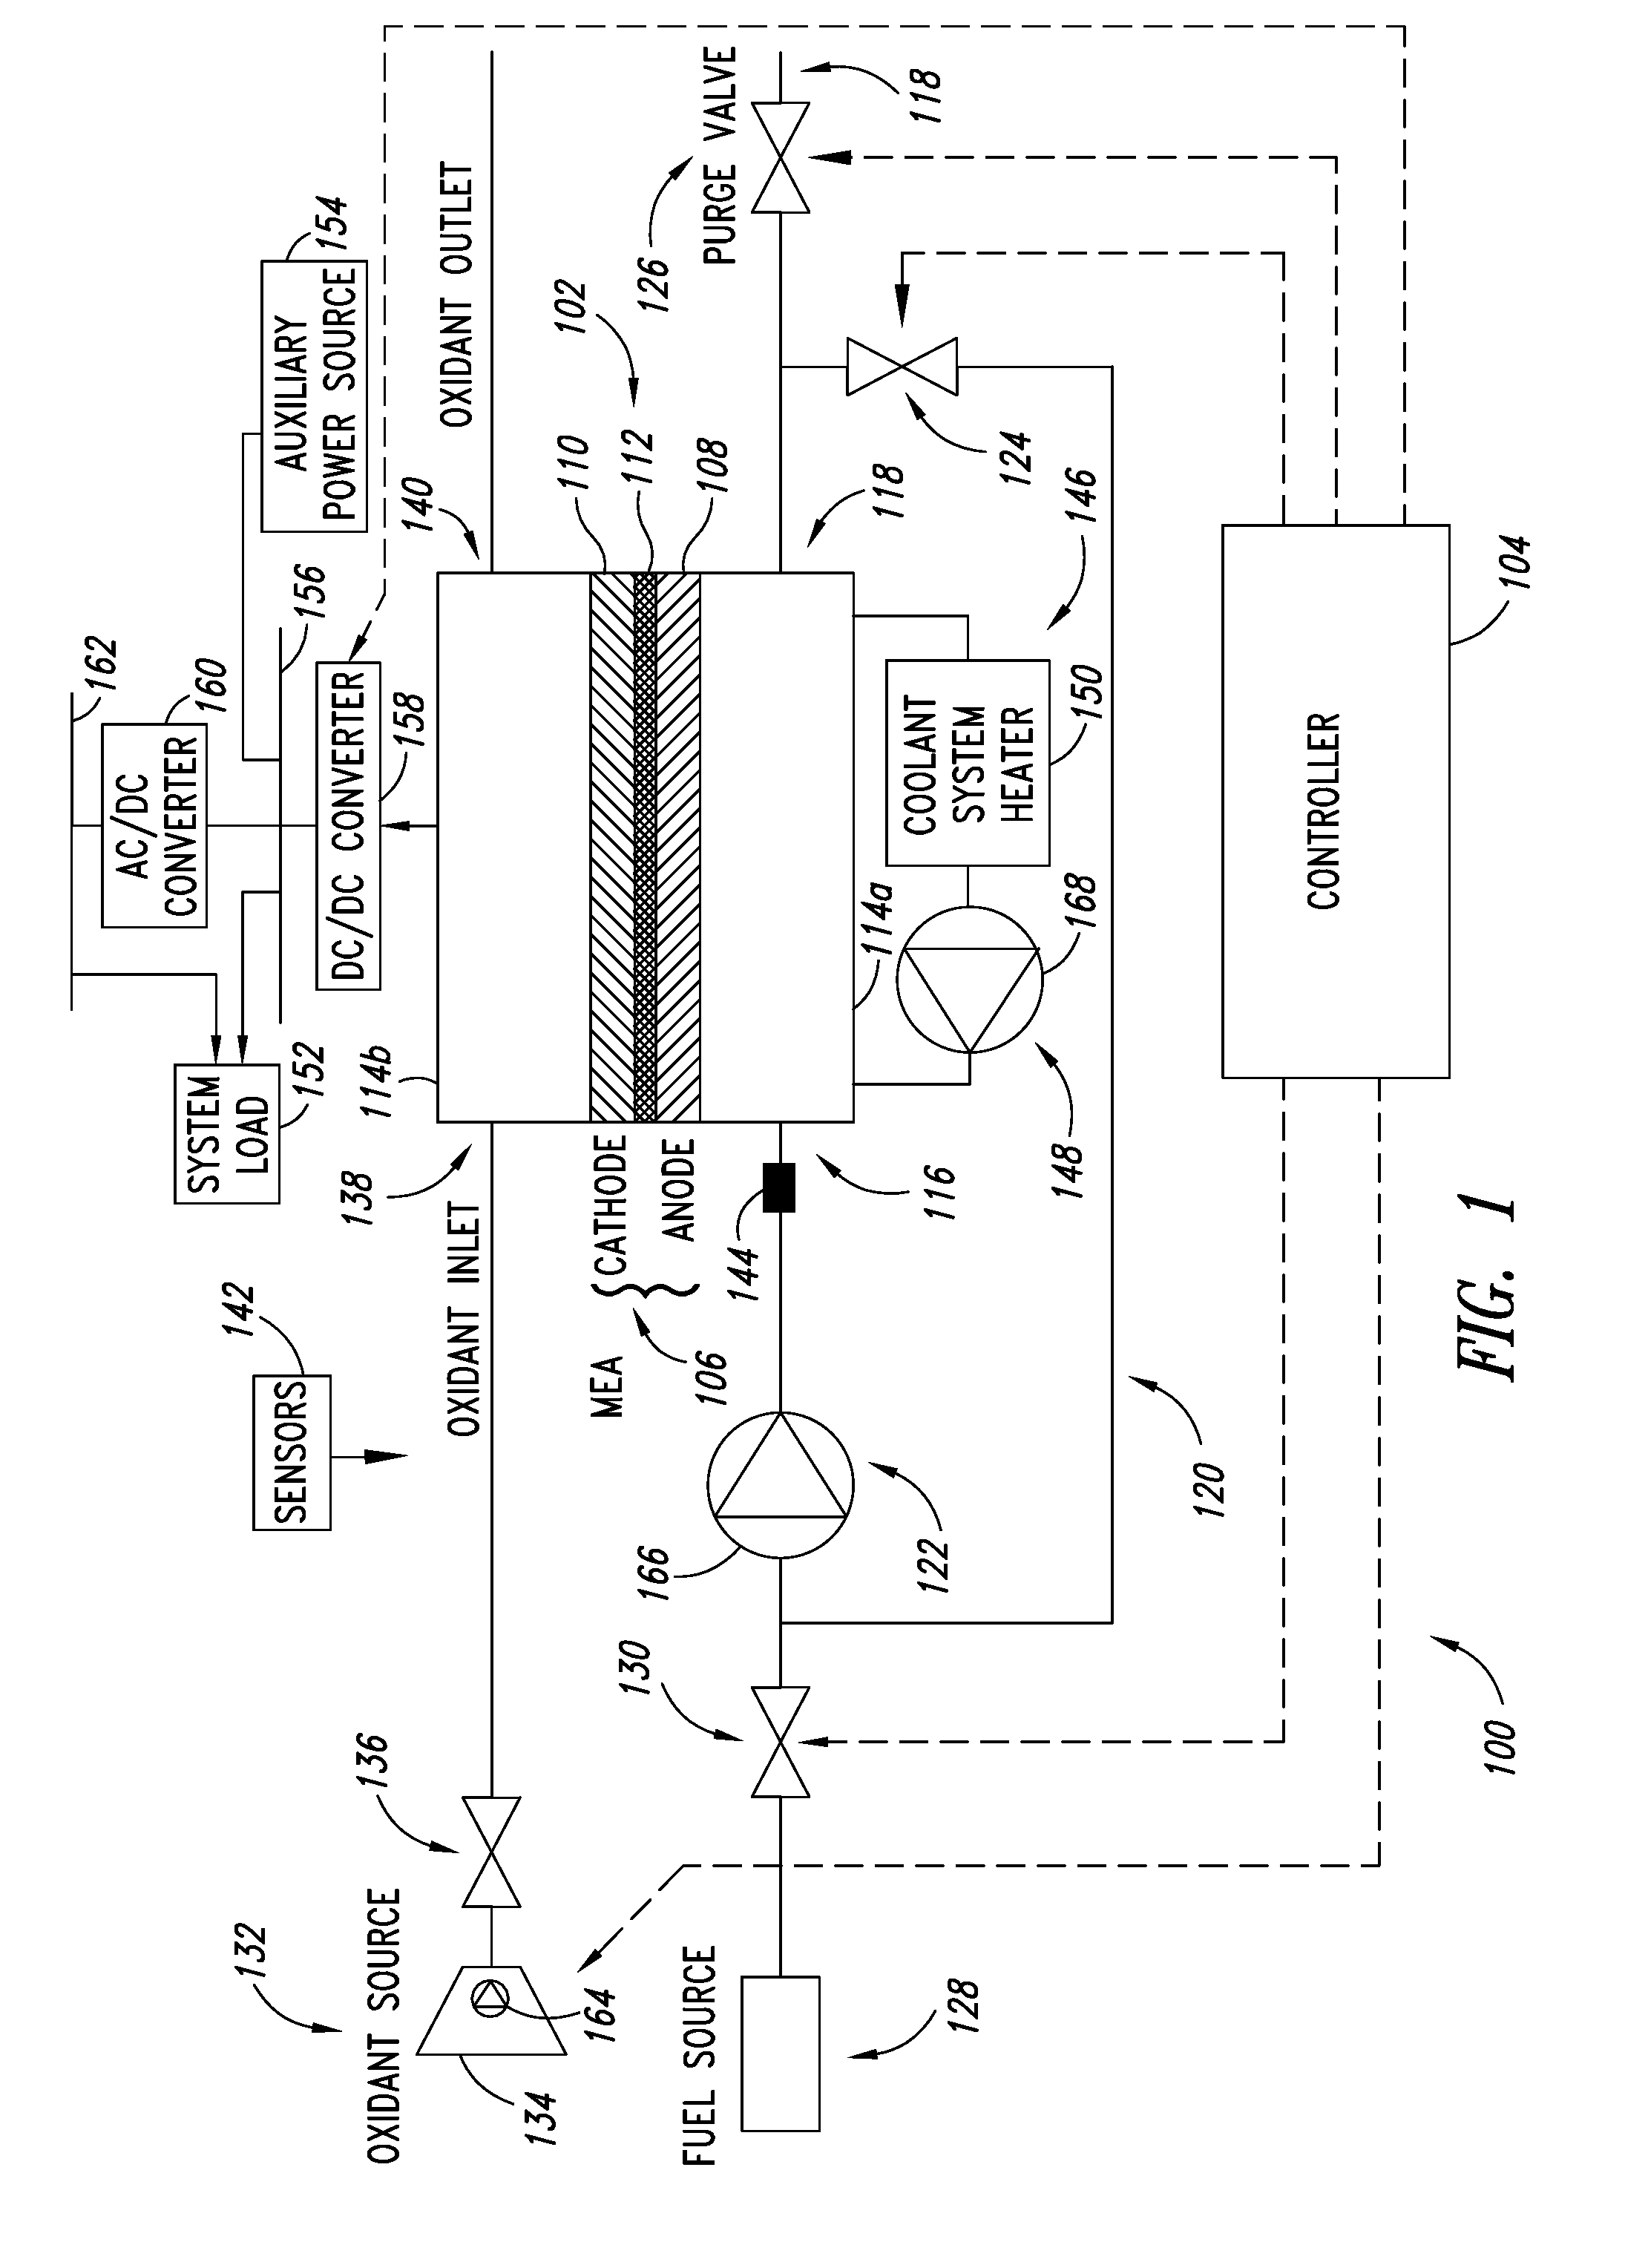 System and method of starting a fuel cell system